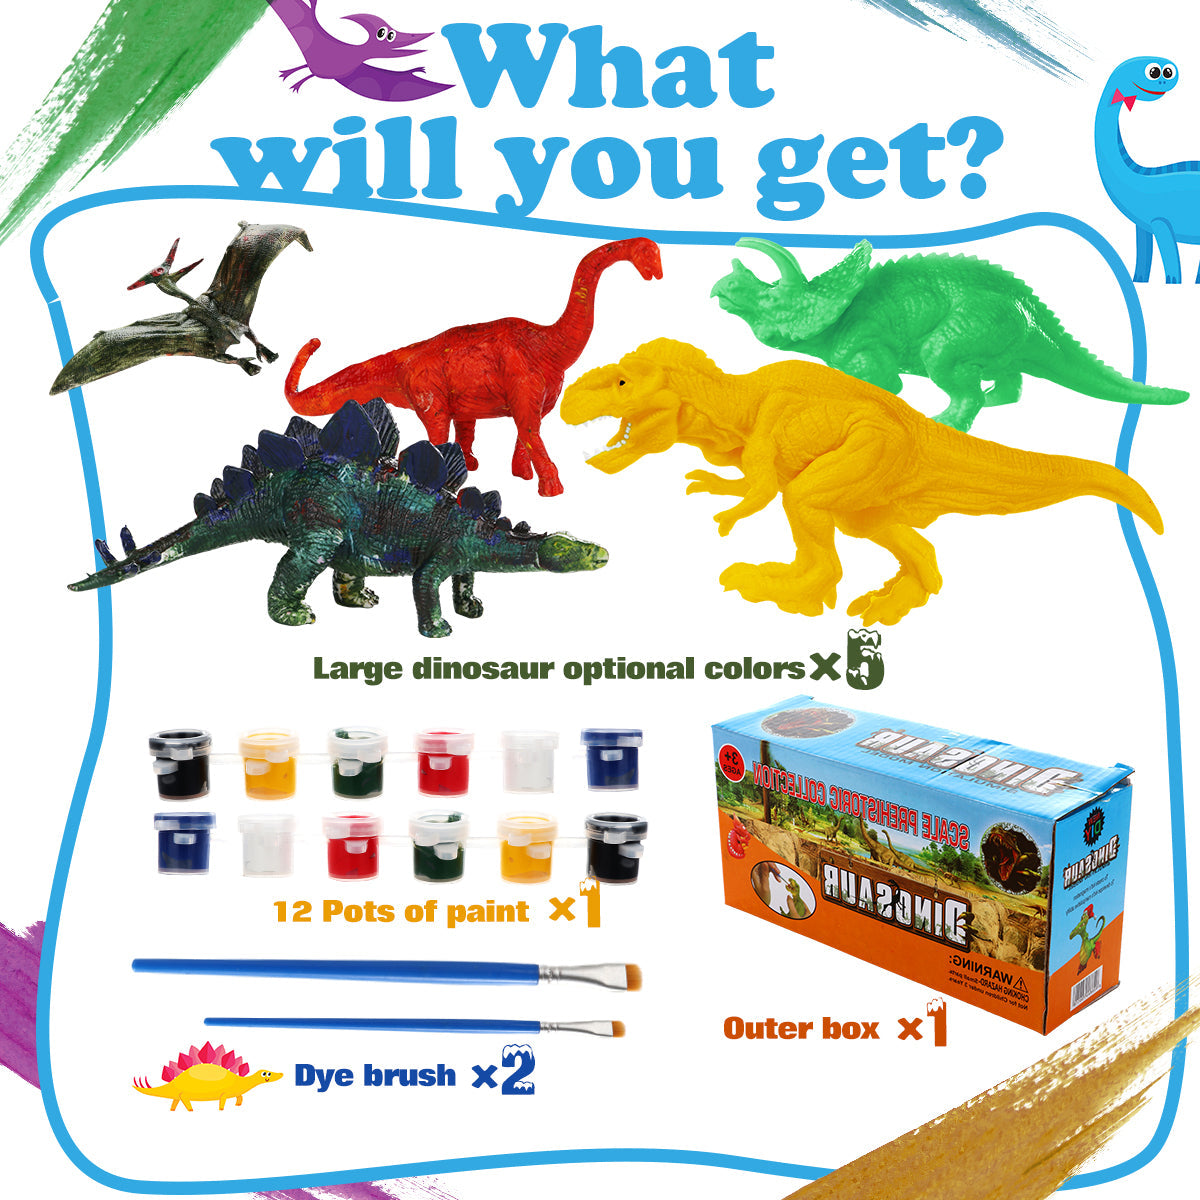 FUNZBO Kids Crafts and Arts Set Painting Kit - Dinosaurs Toys Art and Craft Supplies Party Favors for Boys Girls Age 4 5 6 7 Years Old Kid Creativity DIY Gift Set baby magazin 